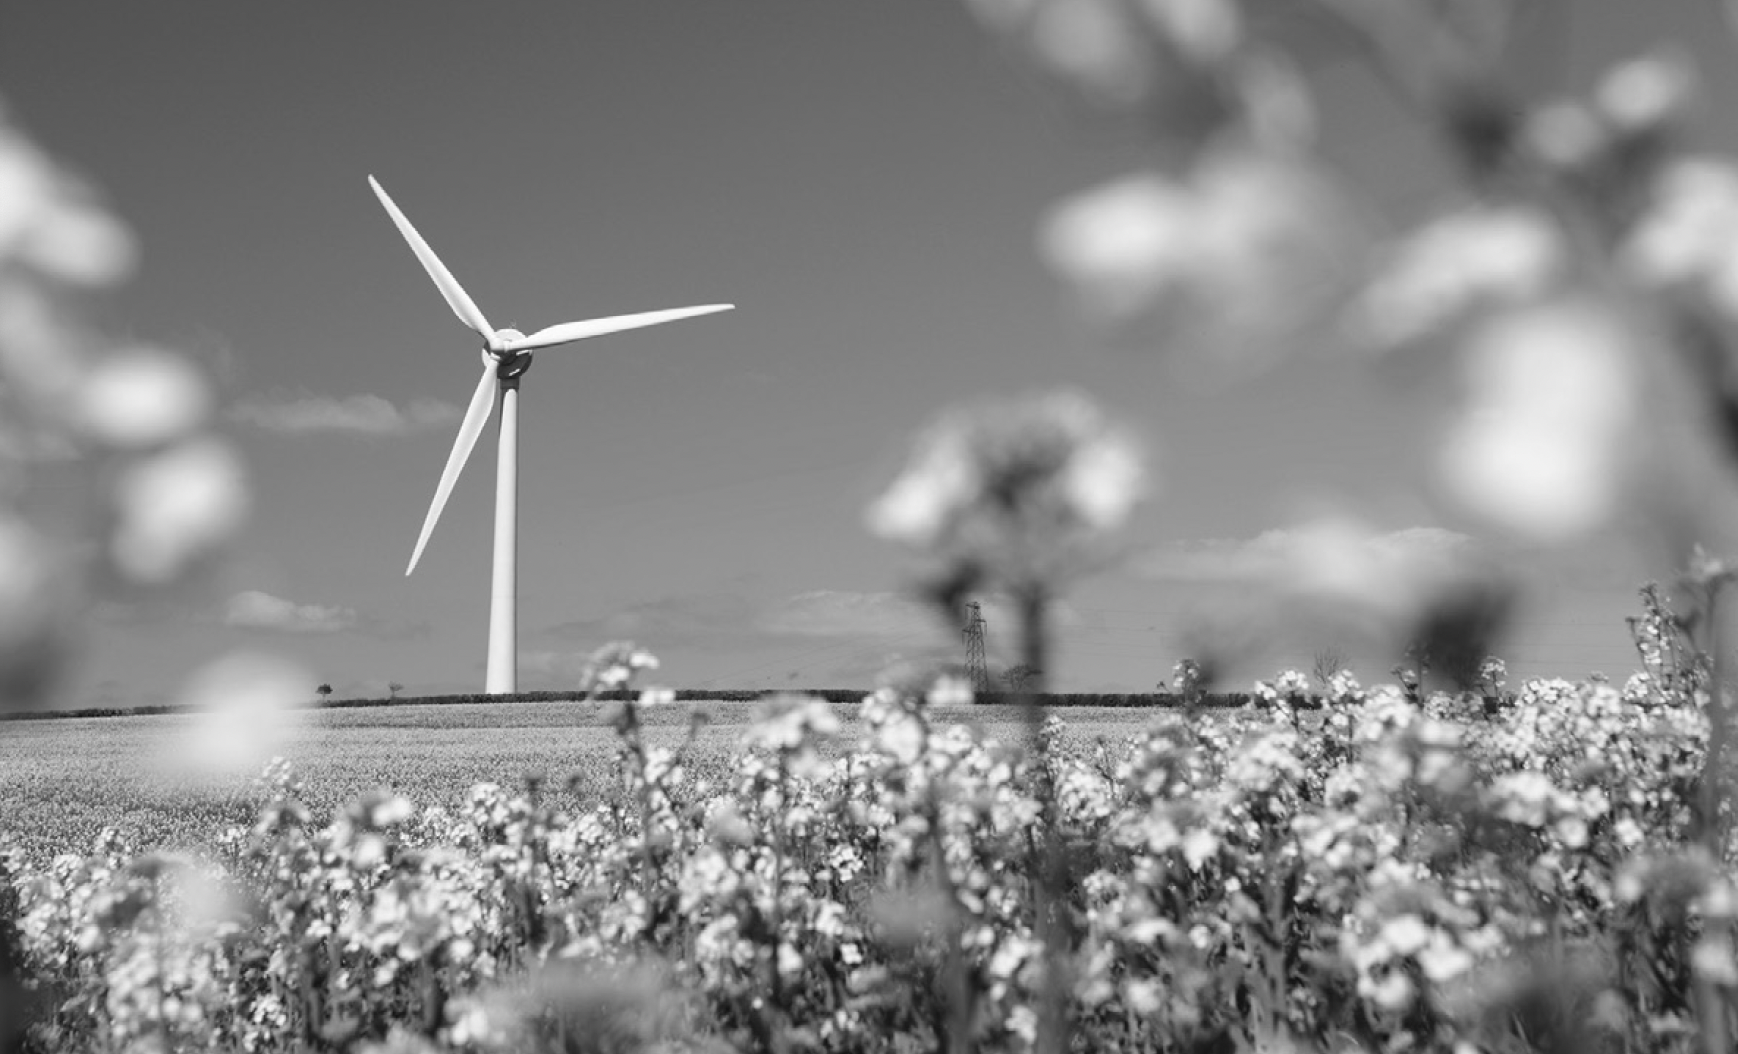 A wind turbine in the background, with flowers in the foreground